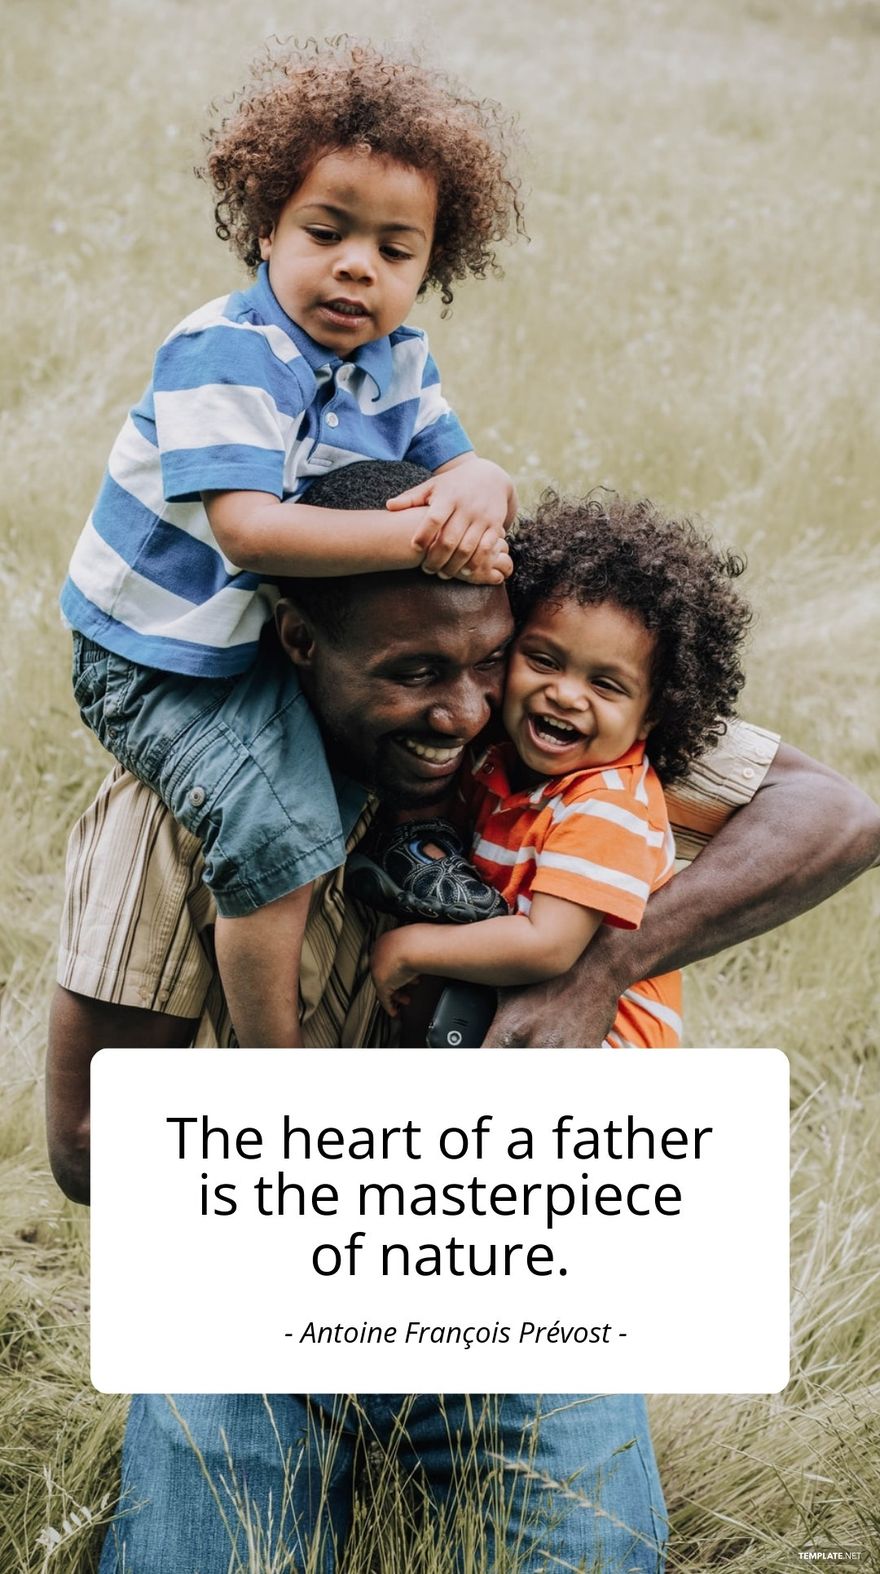 Antoine François Prévost - The heart of a father is the masterpiece of nature.